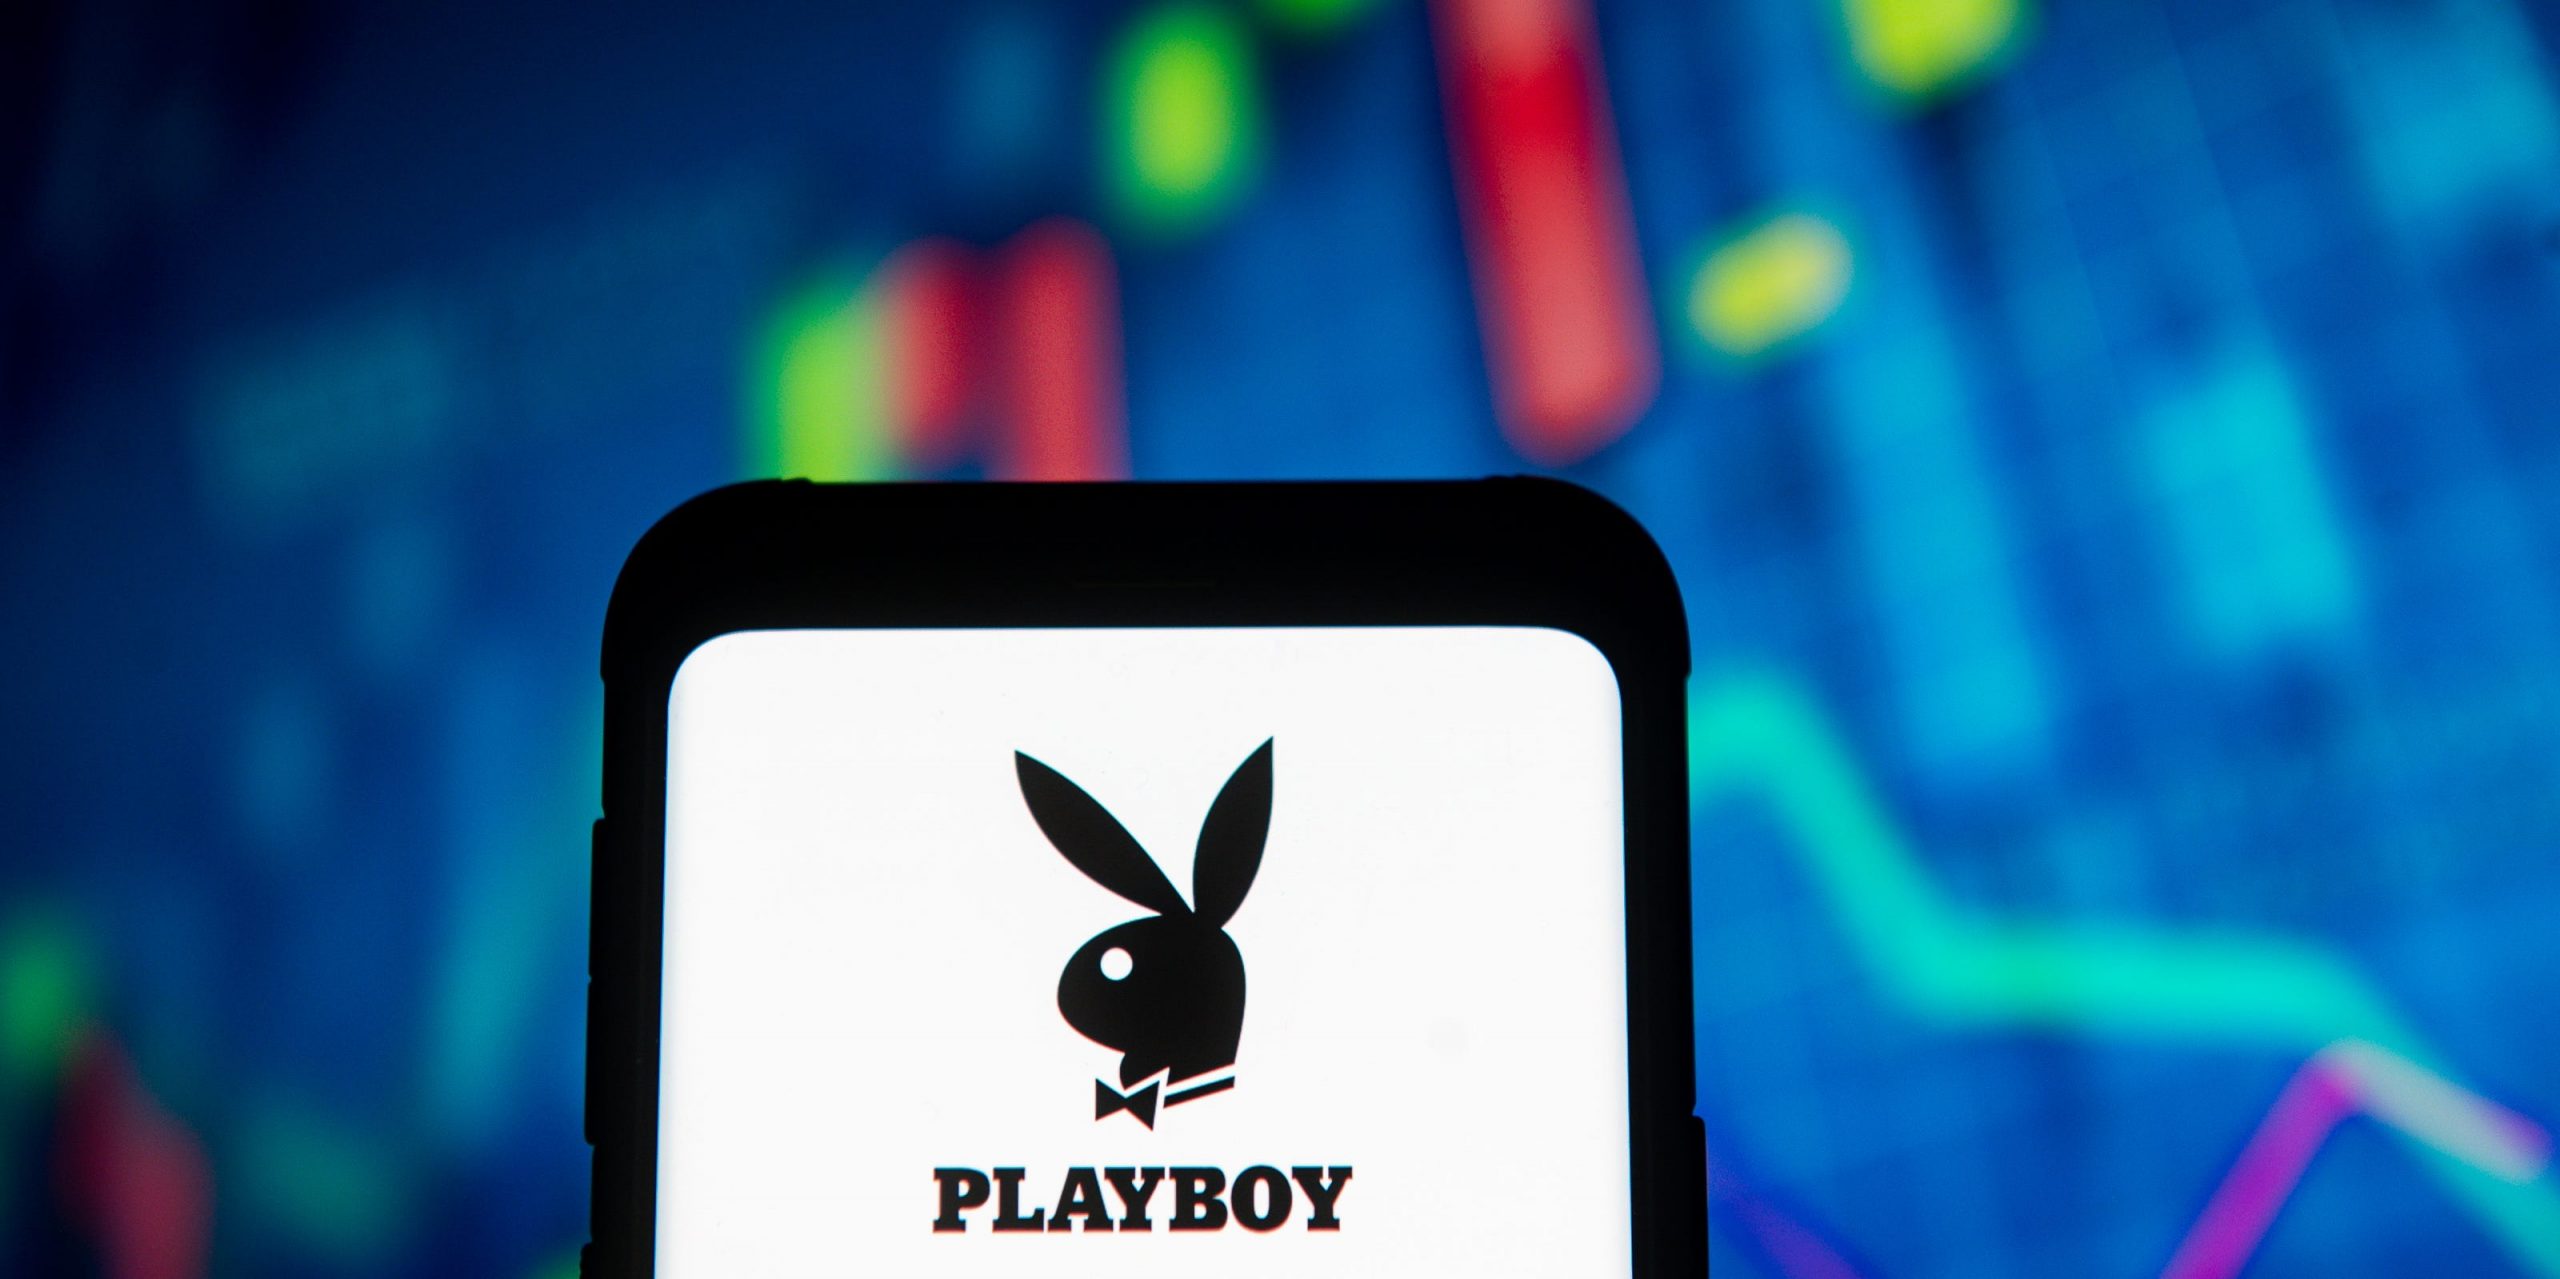 Playboy Getty Images